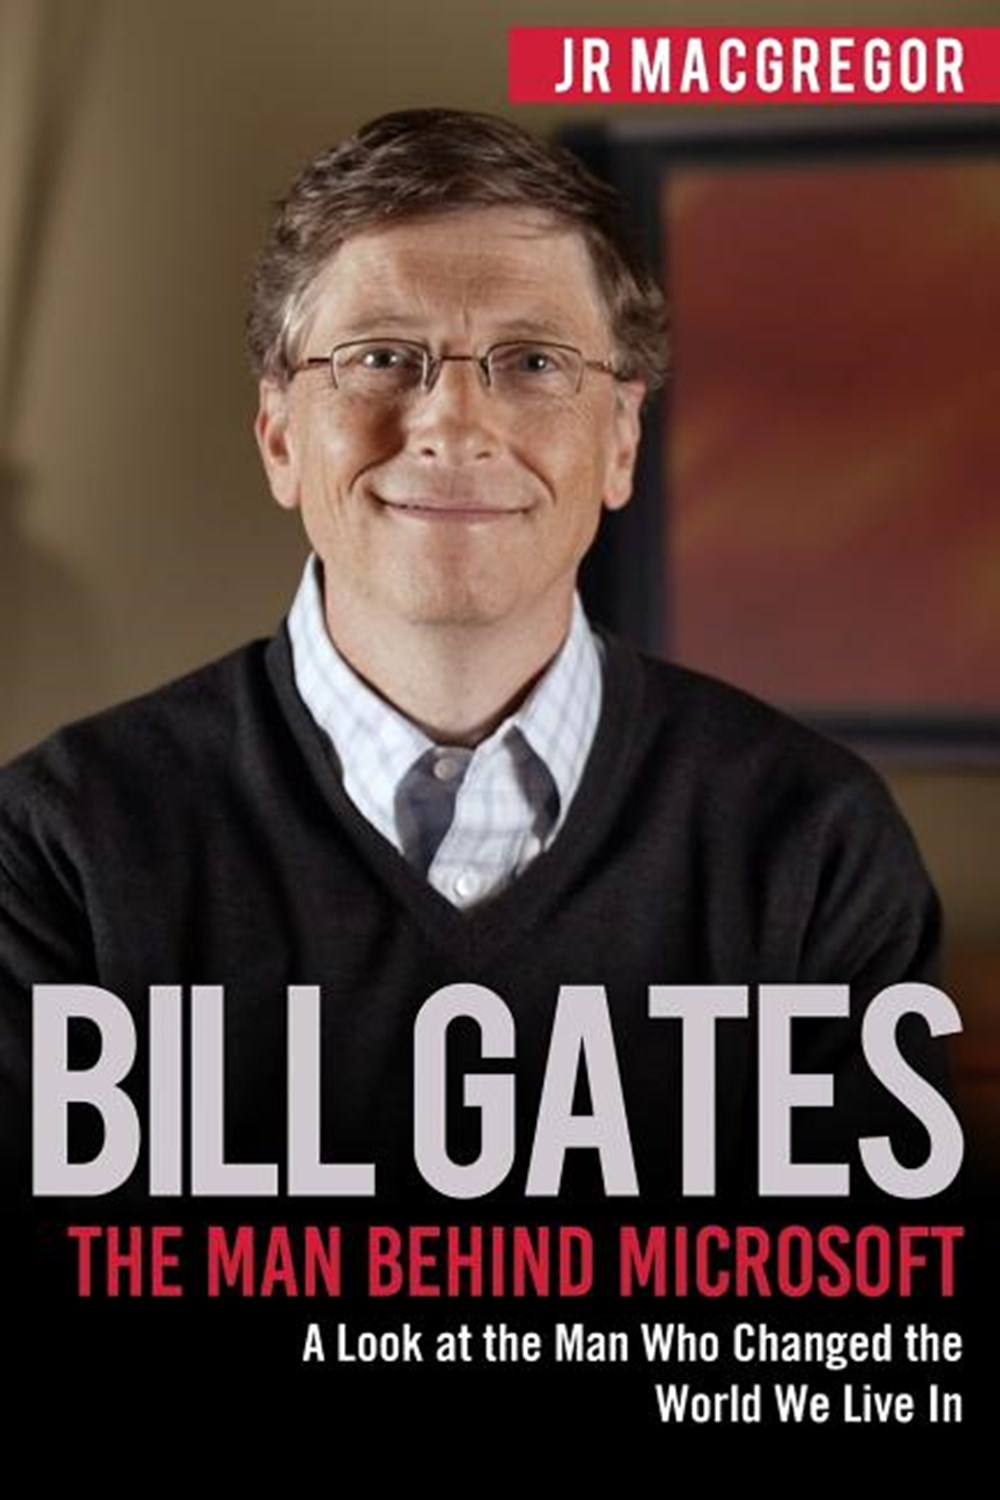 Bill Gates The Man Behind Microsoft: A Look at the Man Who Changed the World We Live In